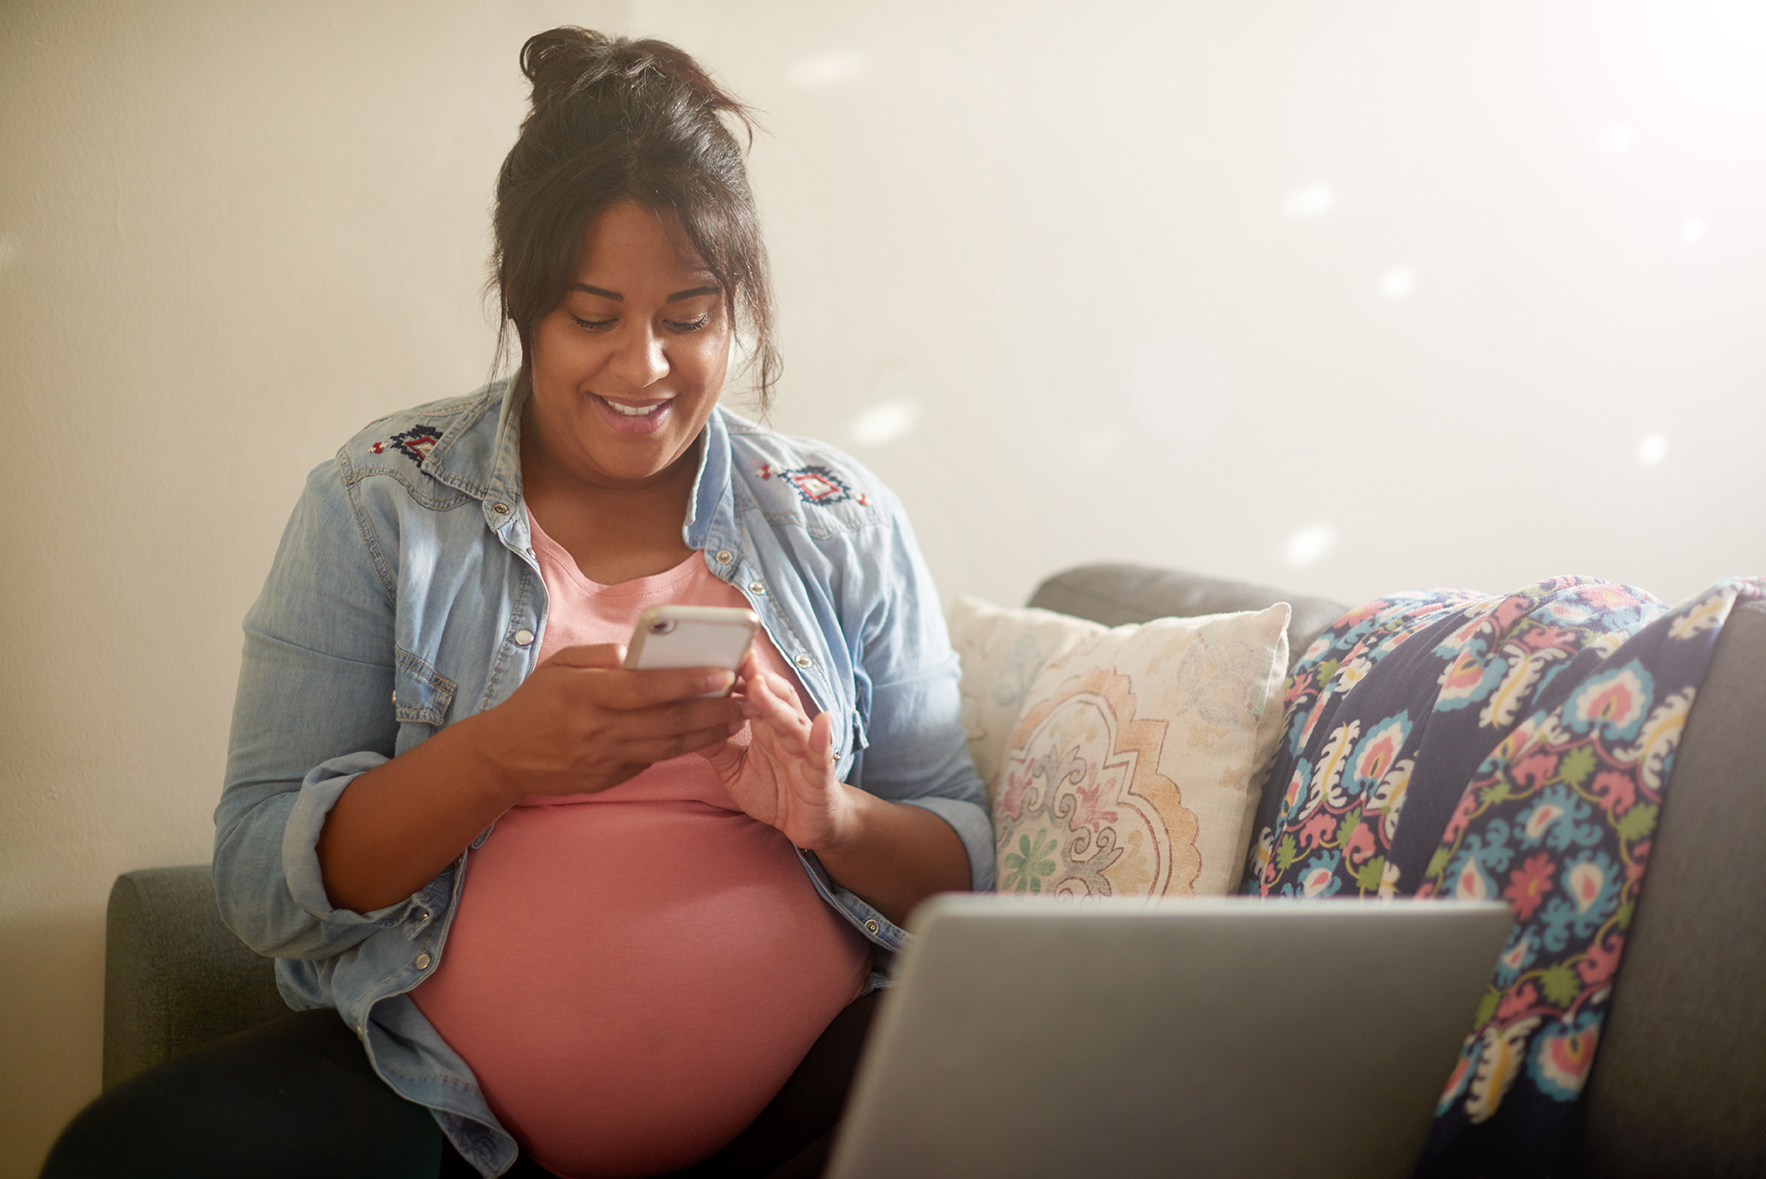 Pregnant woman using a smartphone